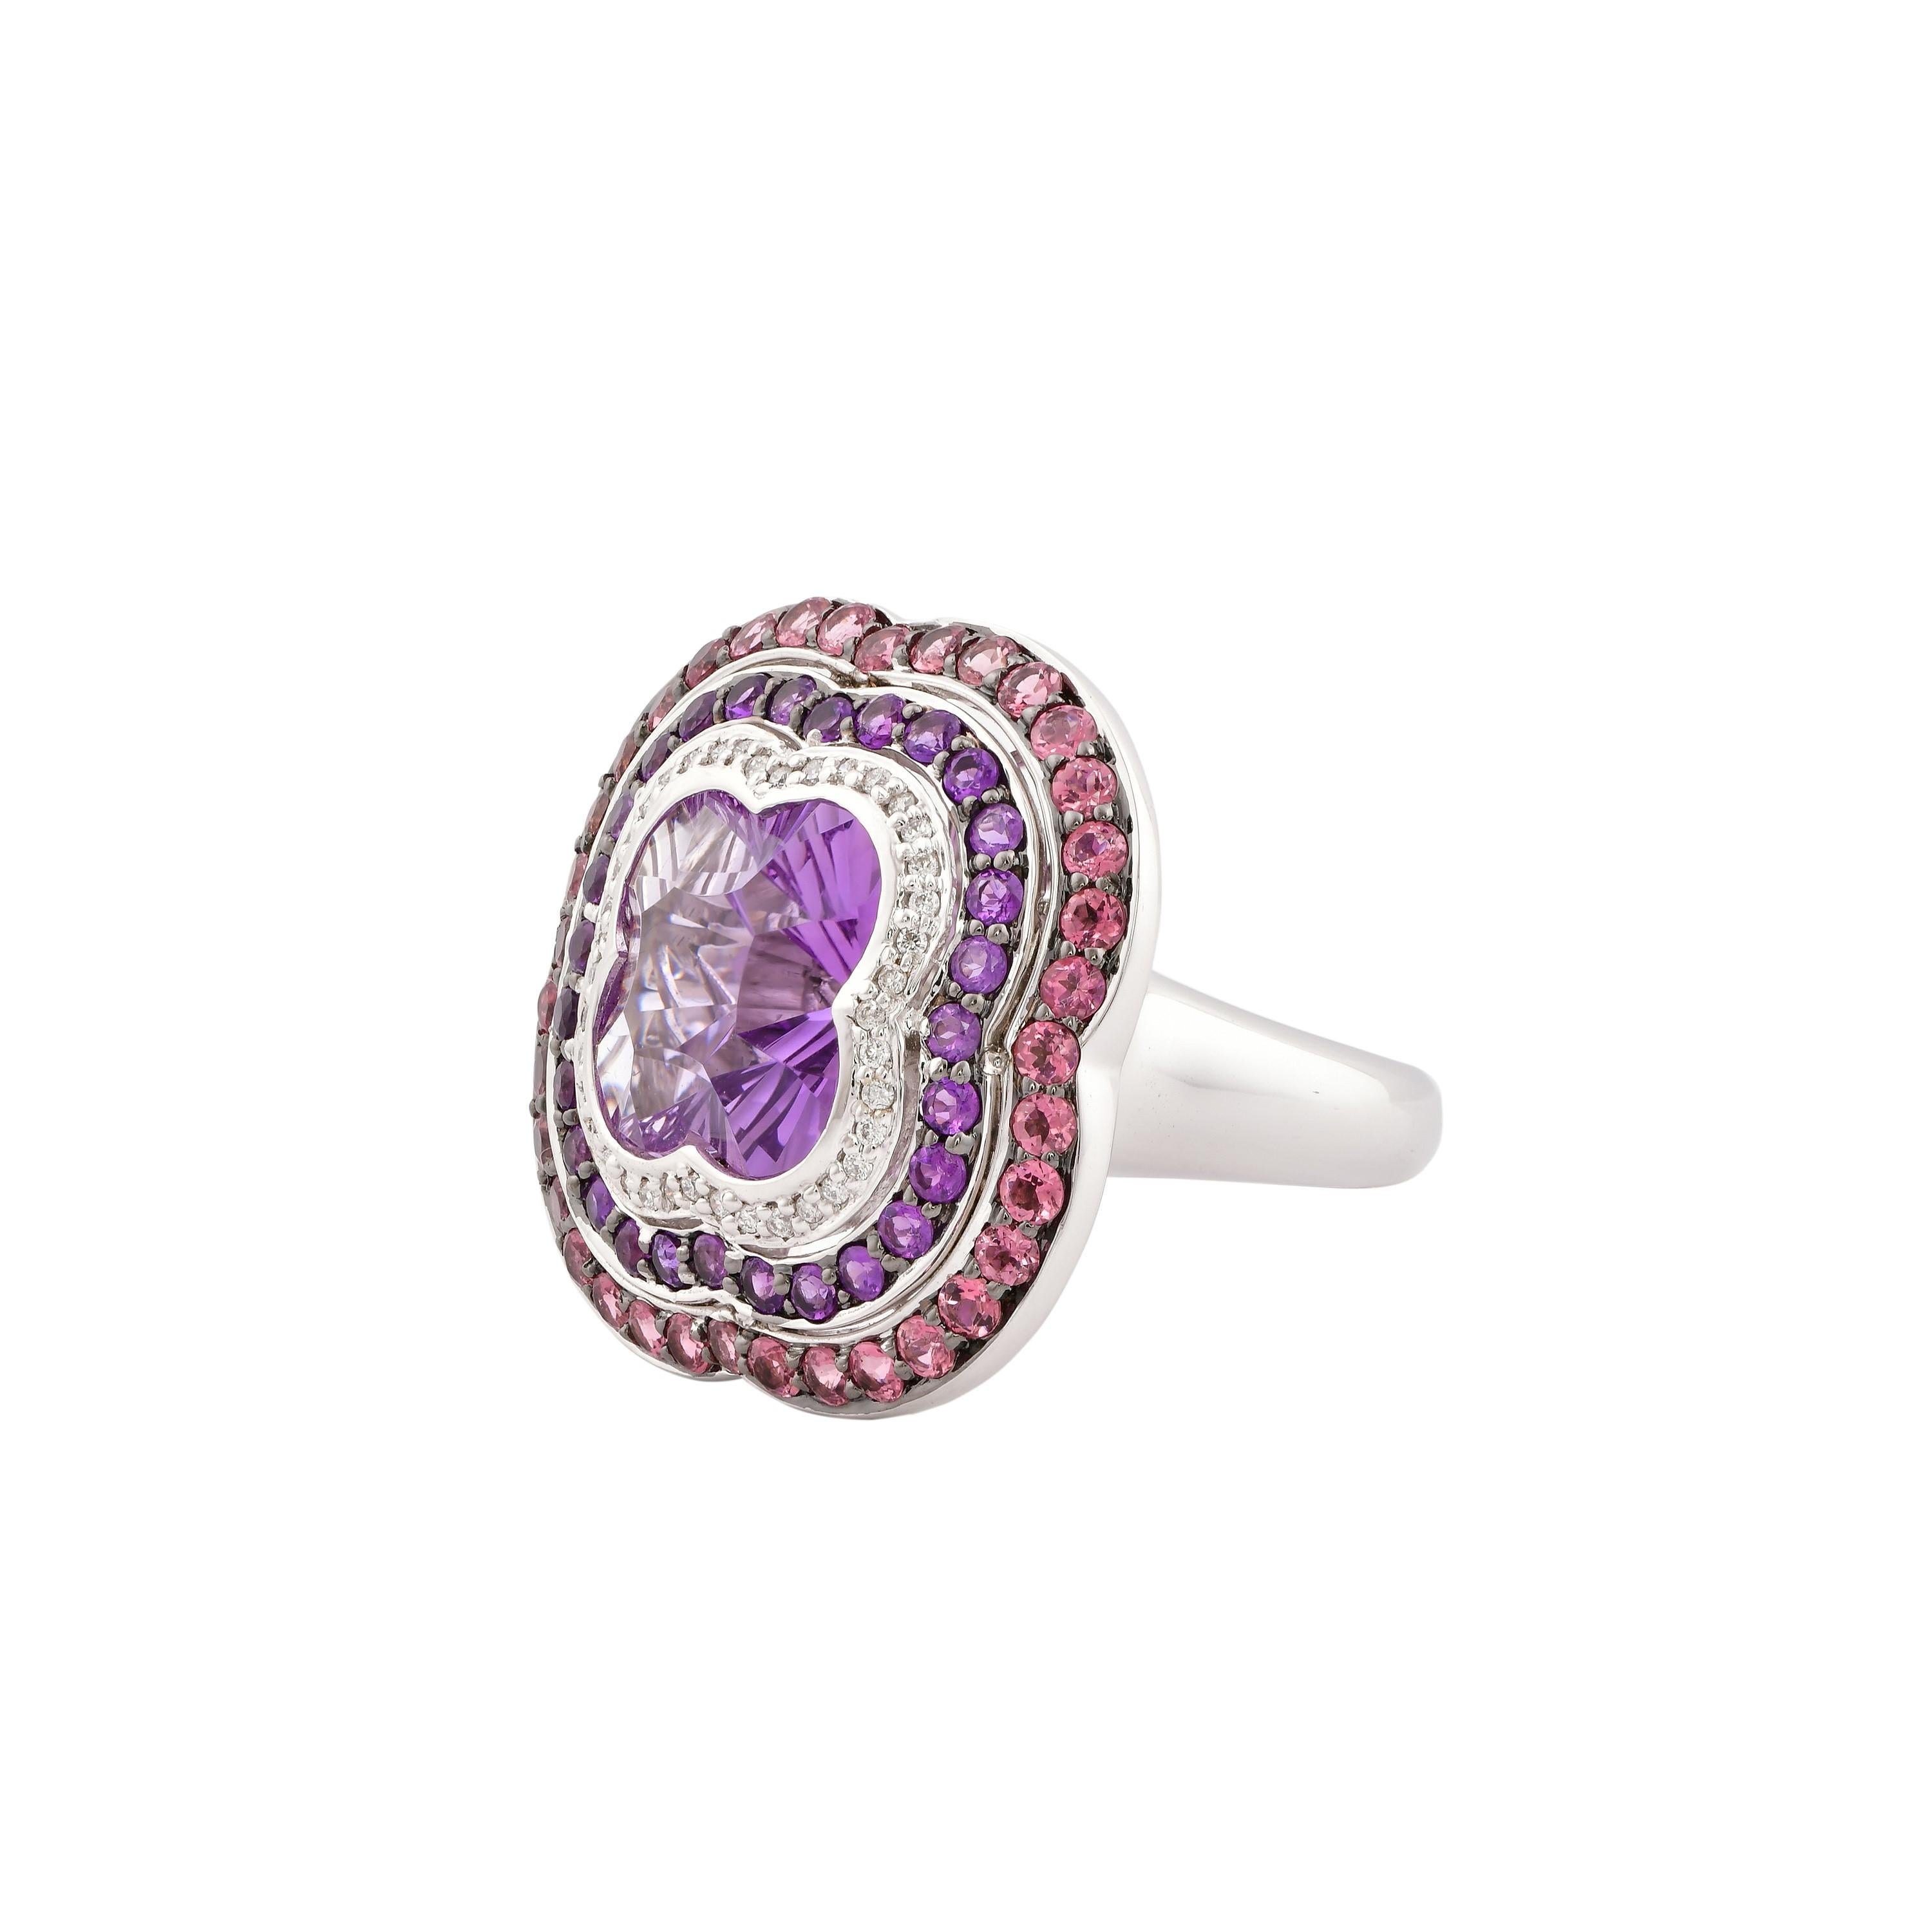 Contemporary 6.2 Carat Amethyst, Pink Tourmaline and Diamond Ring in 14 Karat White Gold For Sale